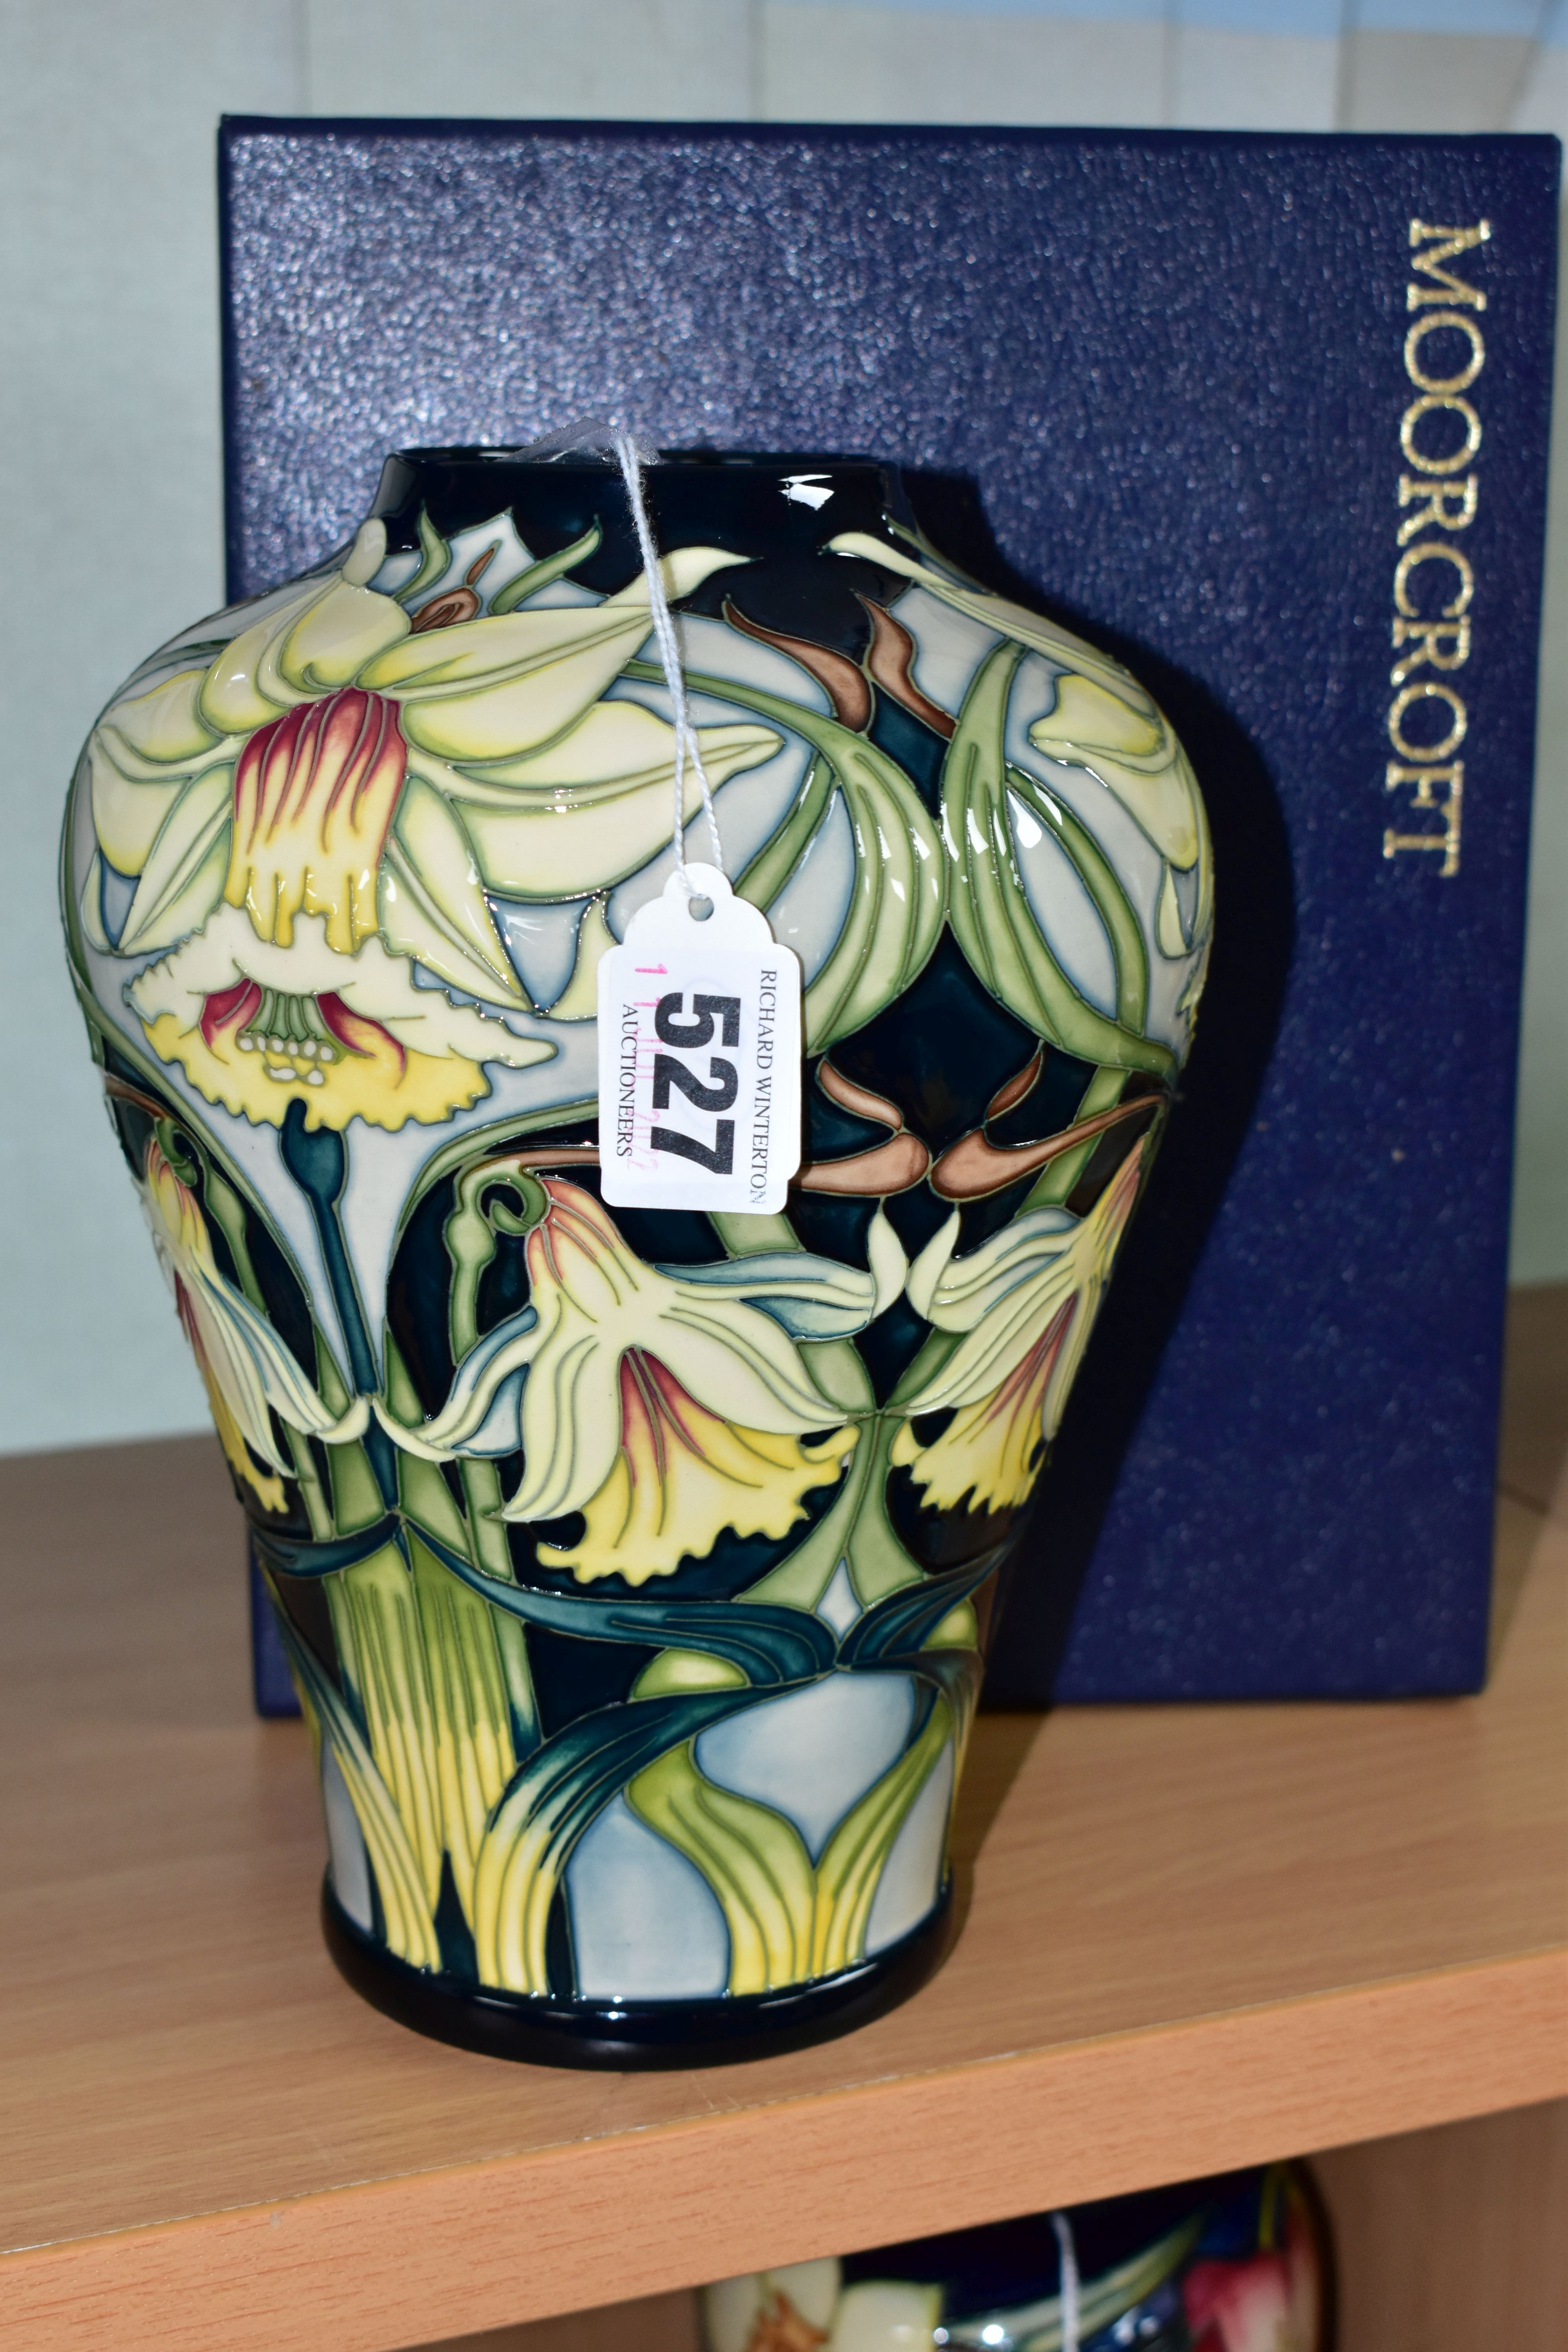 A BOXED MOORCROFT POTTERY 'WORDSWORTH' PATTERN LIMITED EDITION BALUSTER VASE BY RACHEL BISHOP, no.